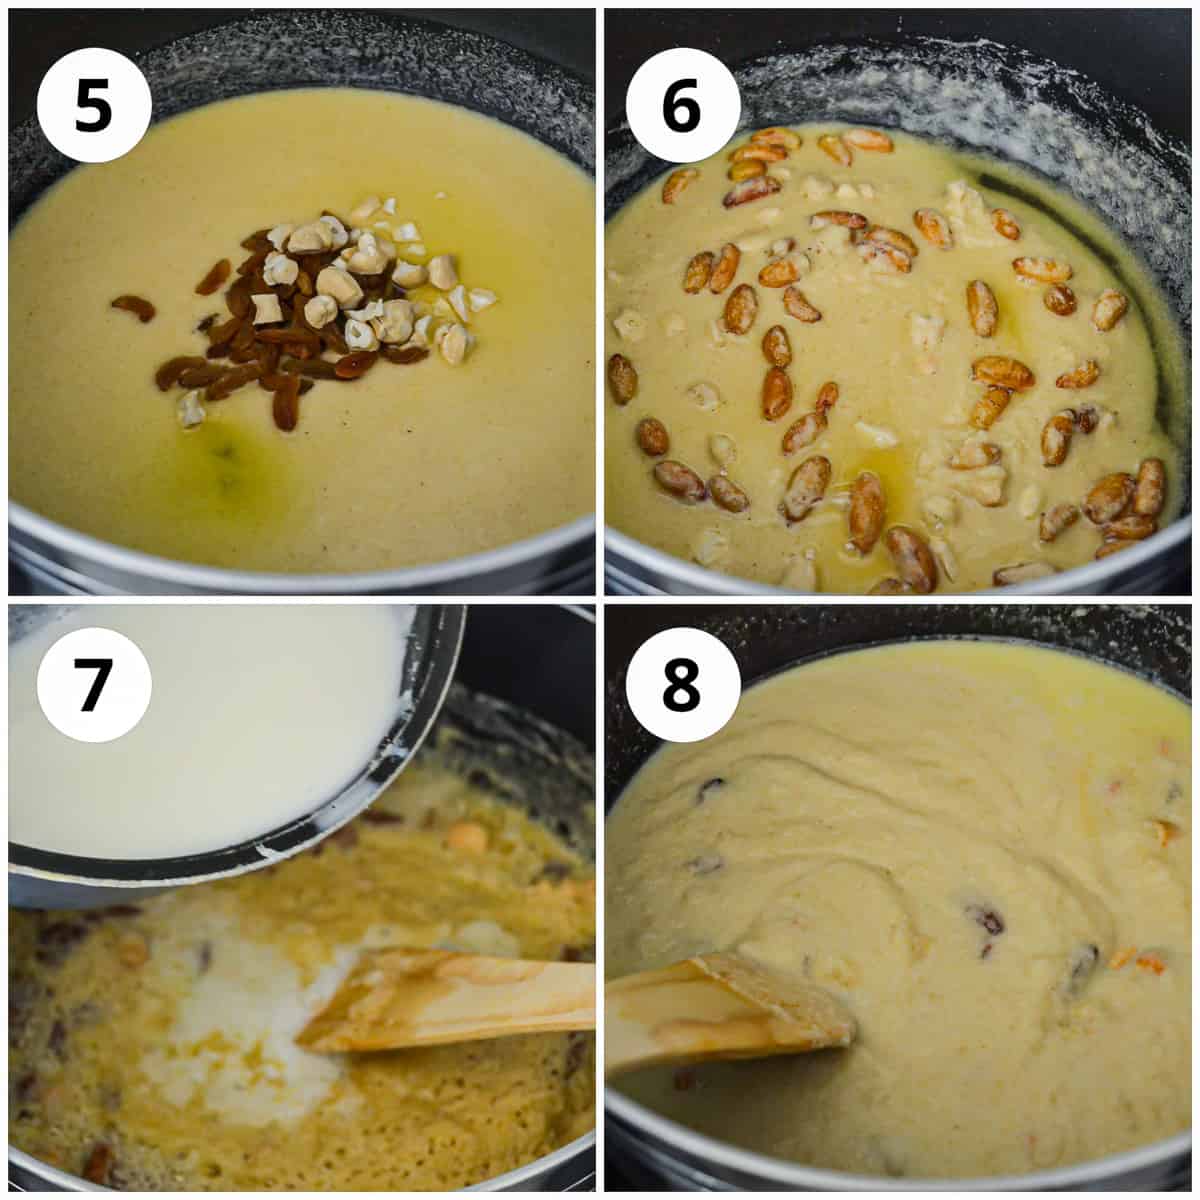 Step by step photos to show adding dried fruits to the rava